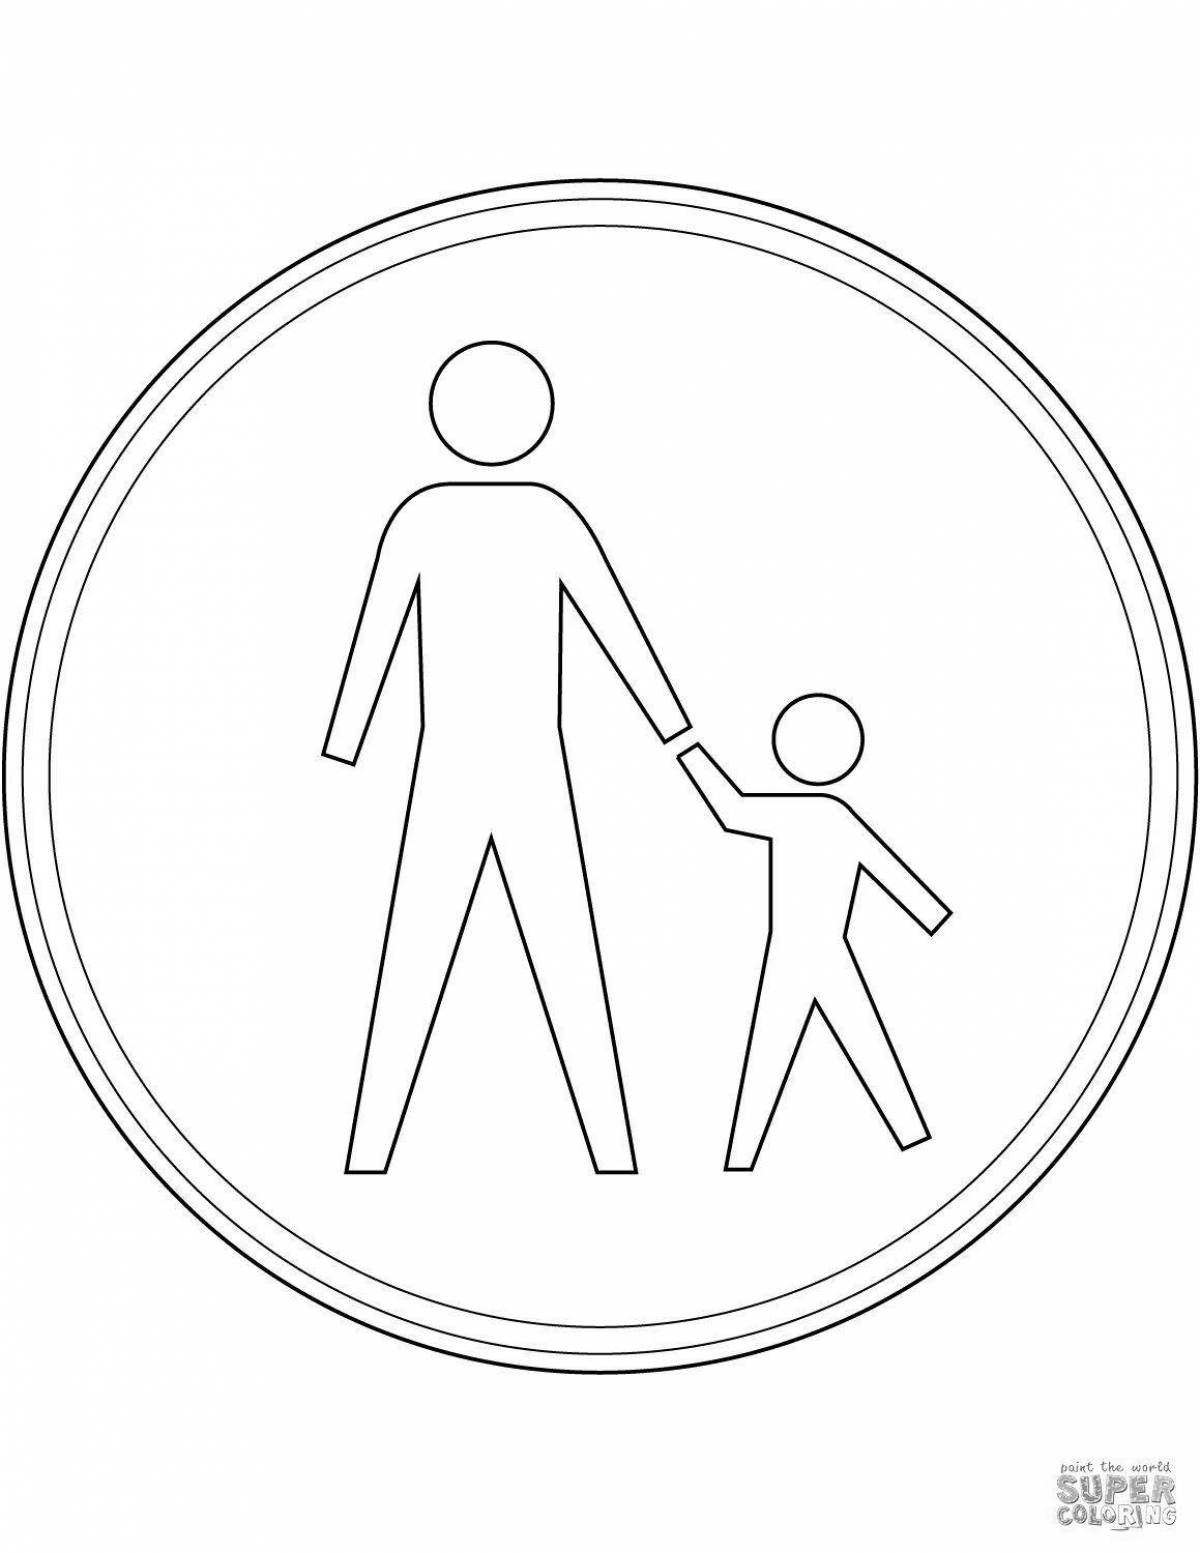 Pedestrian traffic sign prohibited in deep coloring page